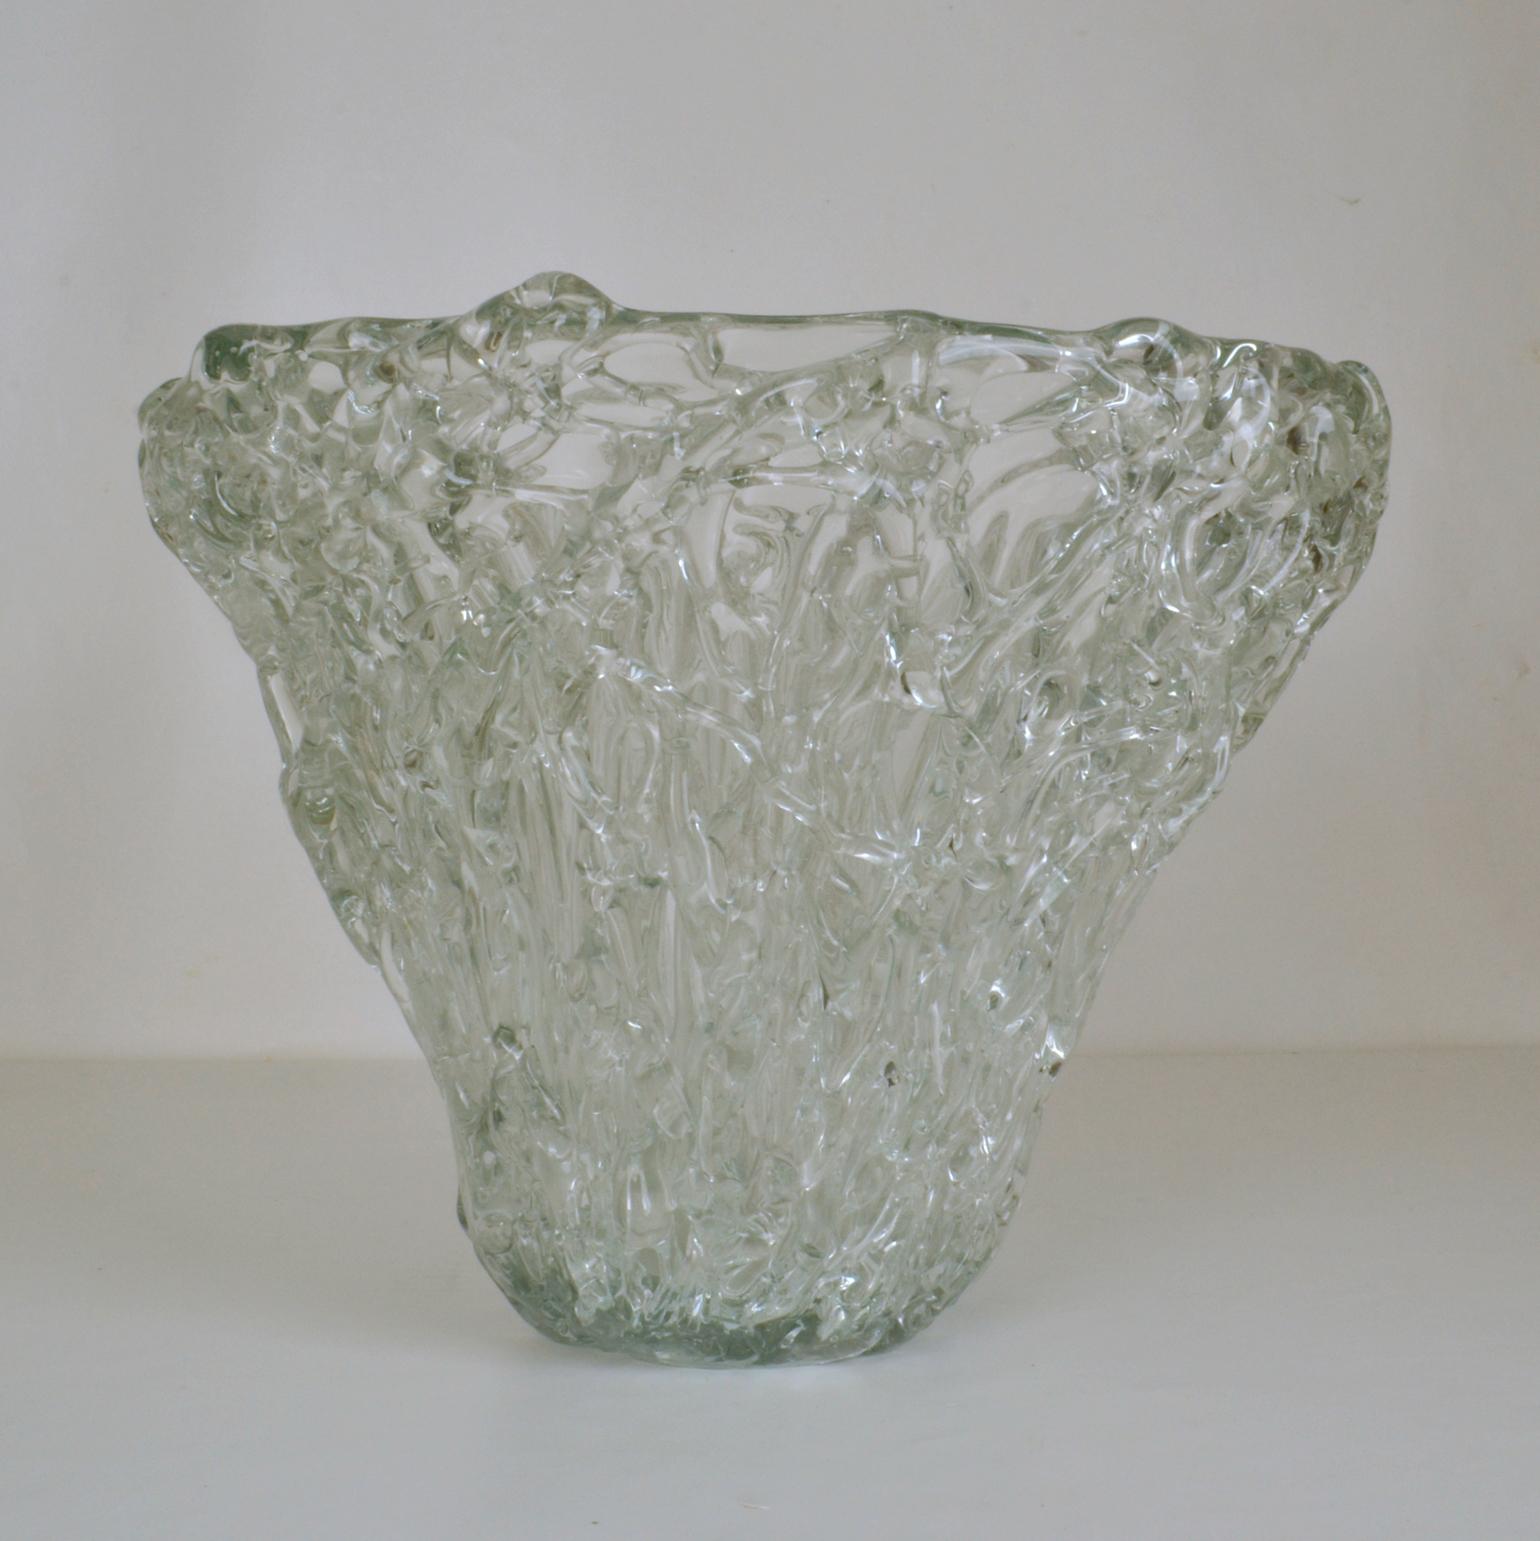 Art Glass Large Clear Glass Vessel with Abstract Texture by Mihai Topescu